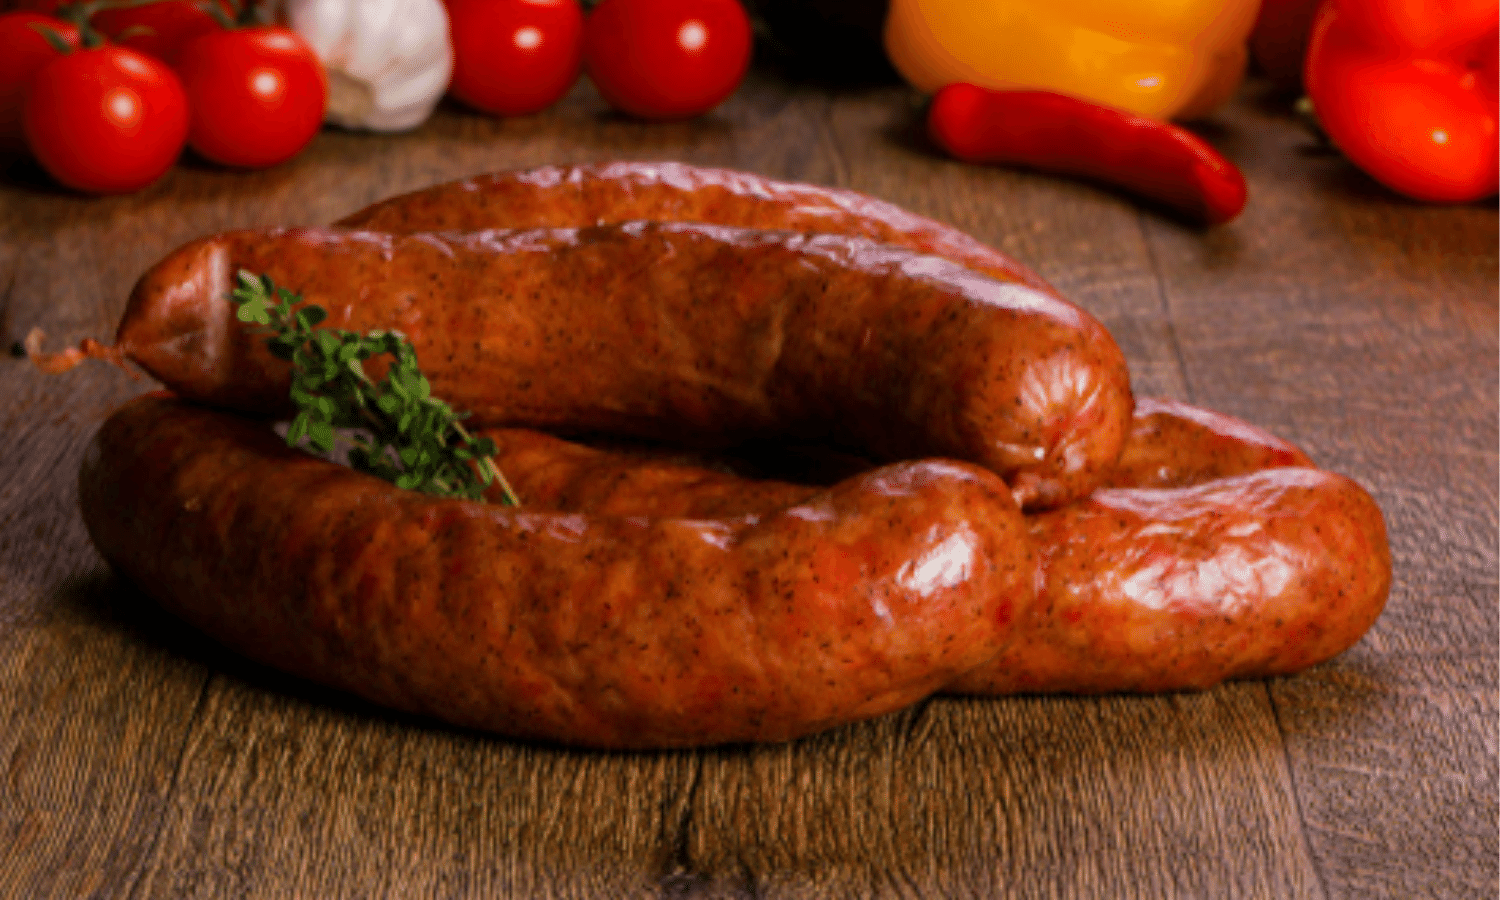 Pan frying Andouille sausage is a good cooking way